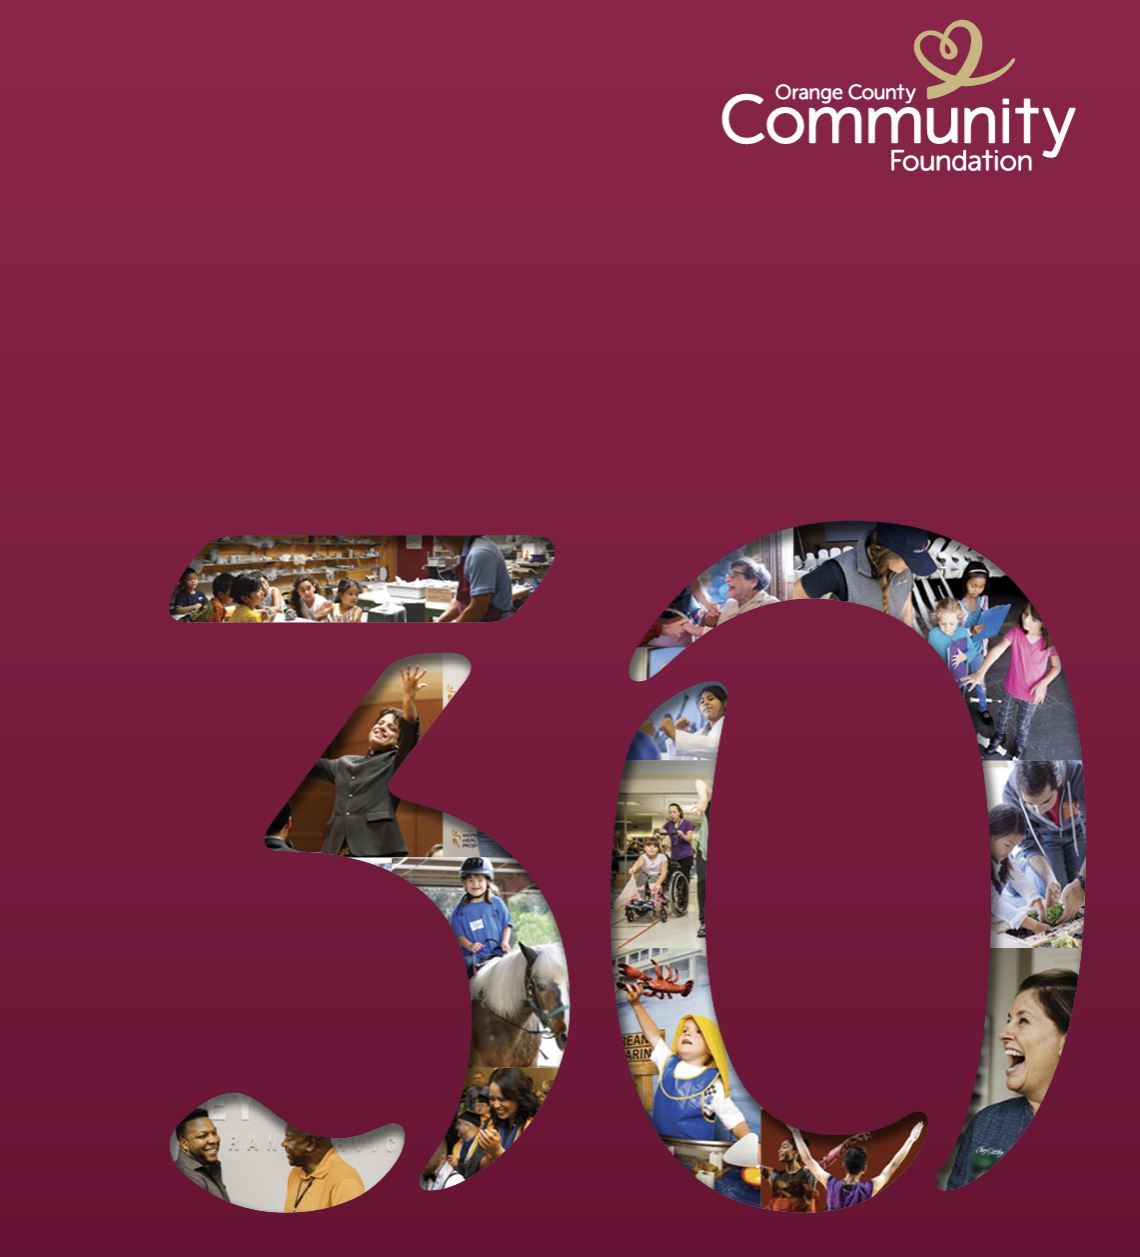 OCCF Annual Report 2019 – 30 Years of Impact